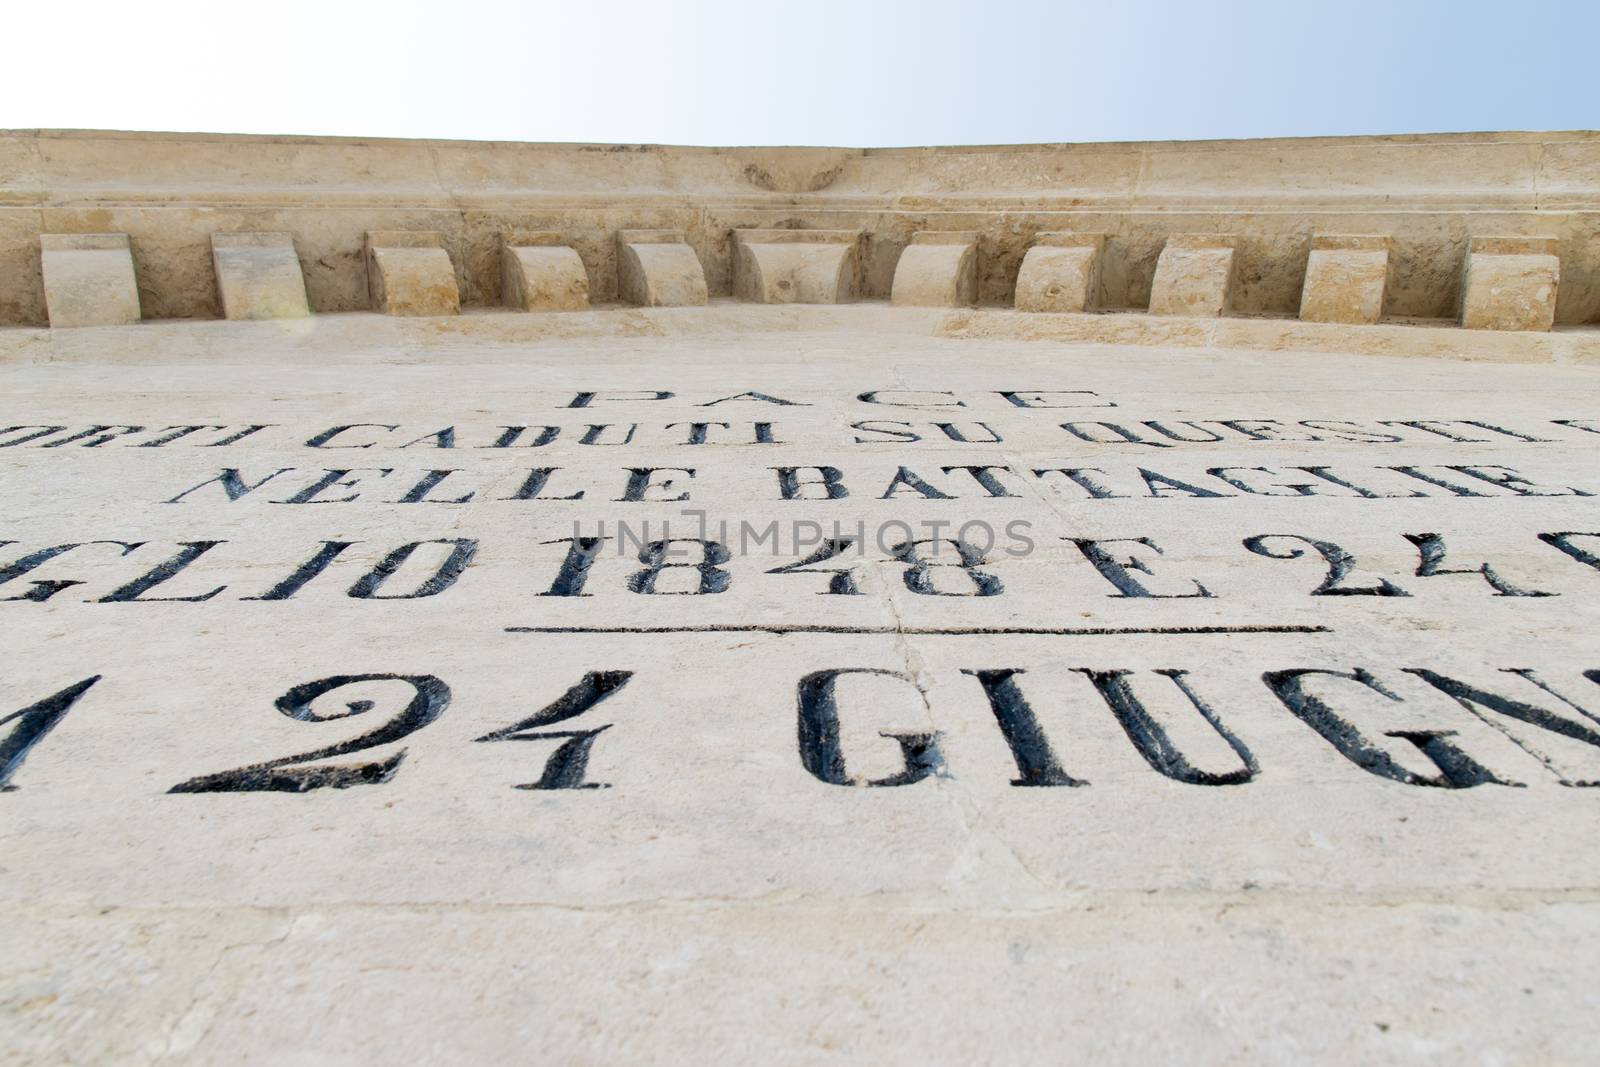 phrases engraved on commemorative monument